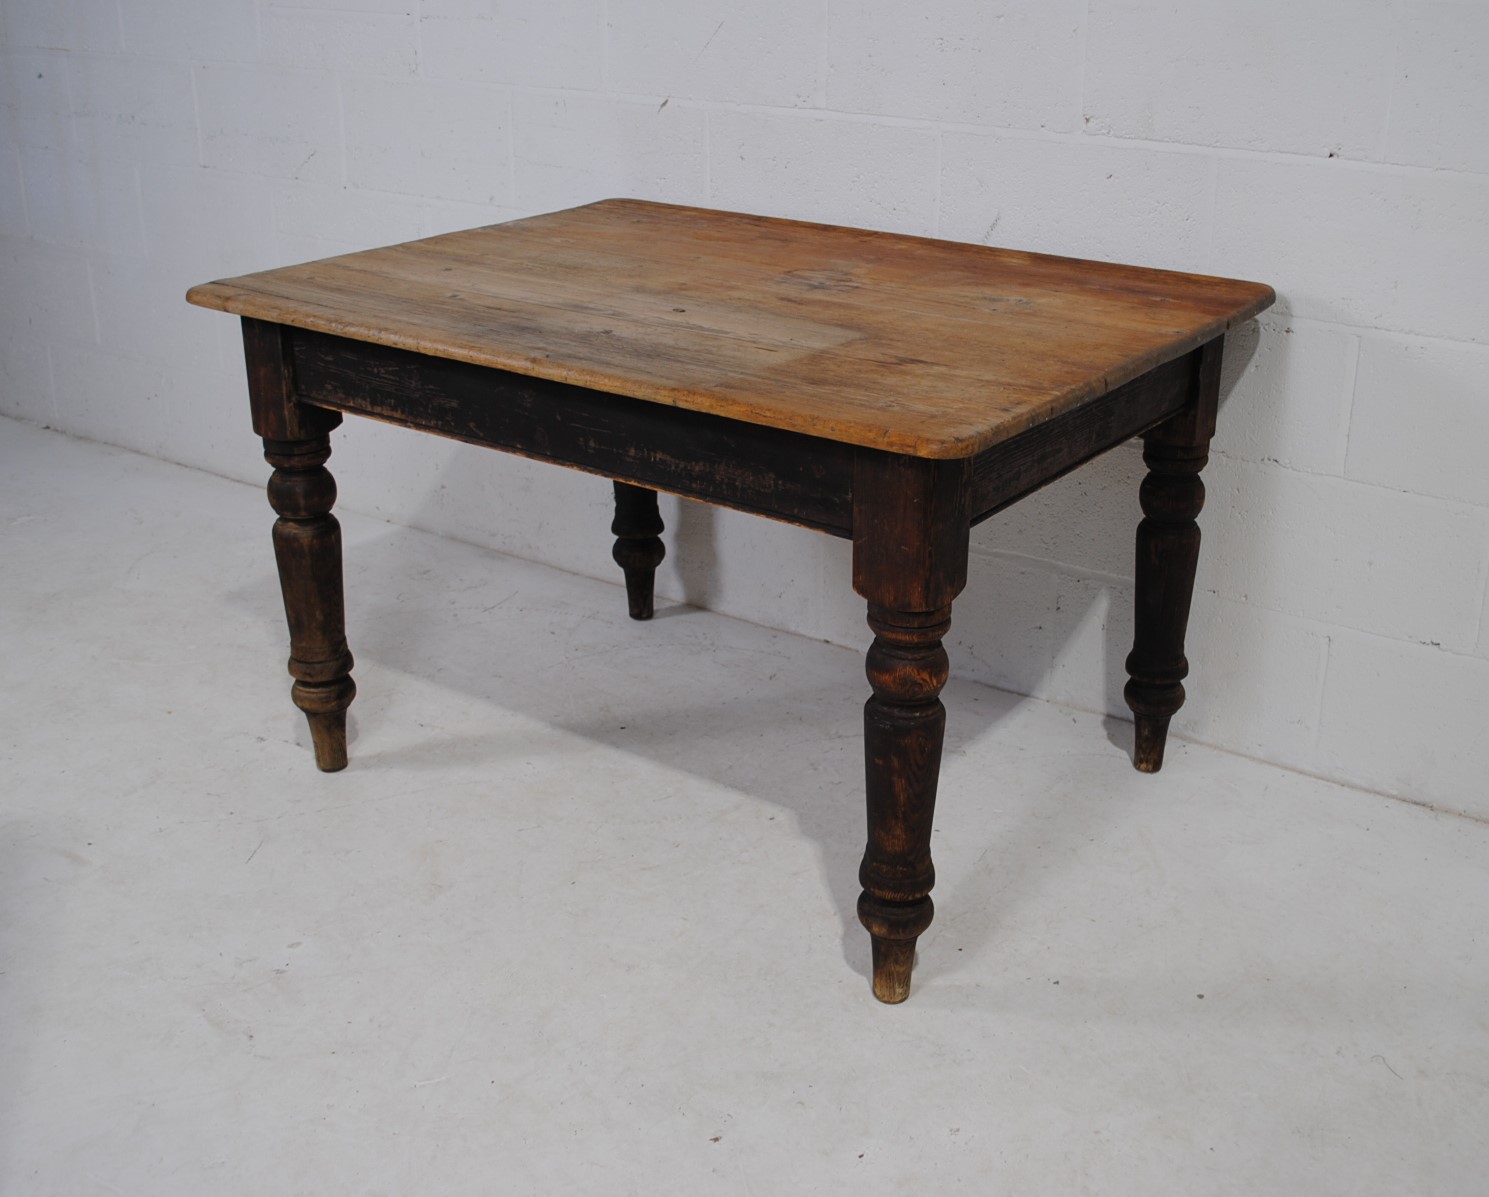 An antique pine farmhouse table, with single drawer, raised on turned legs - length 91cm, depth - Image 2 of 6